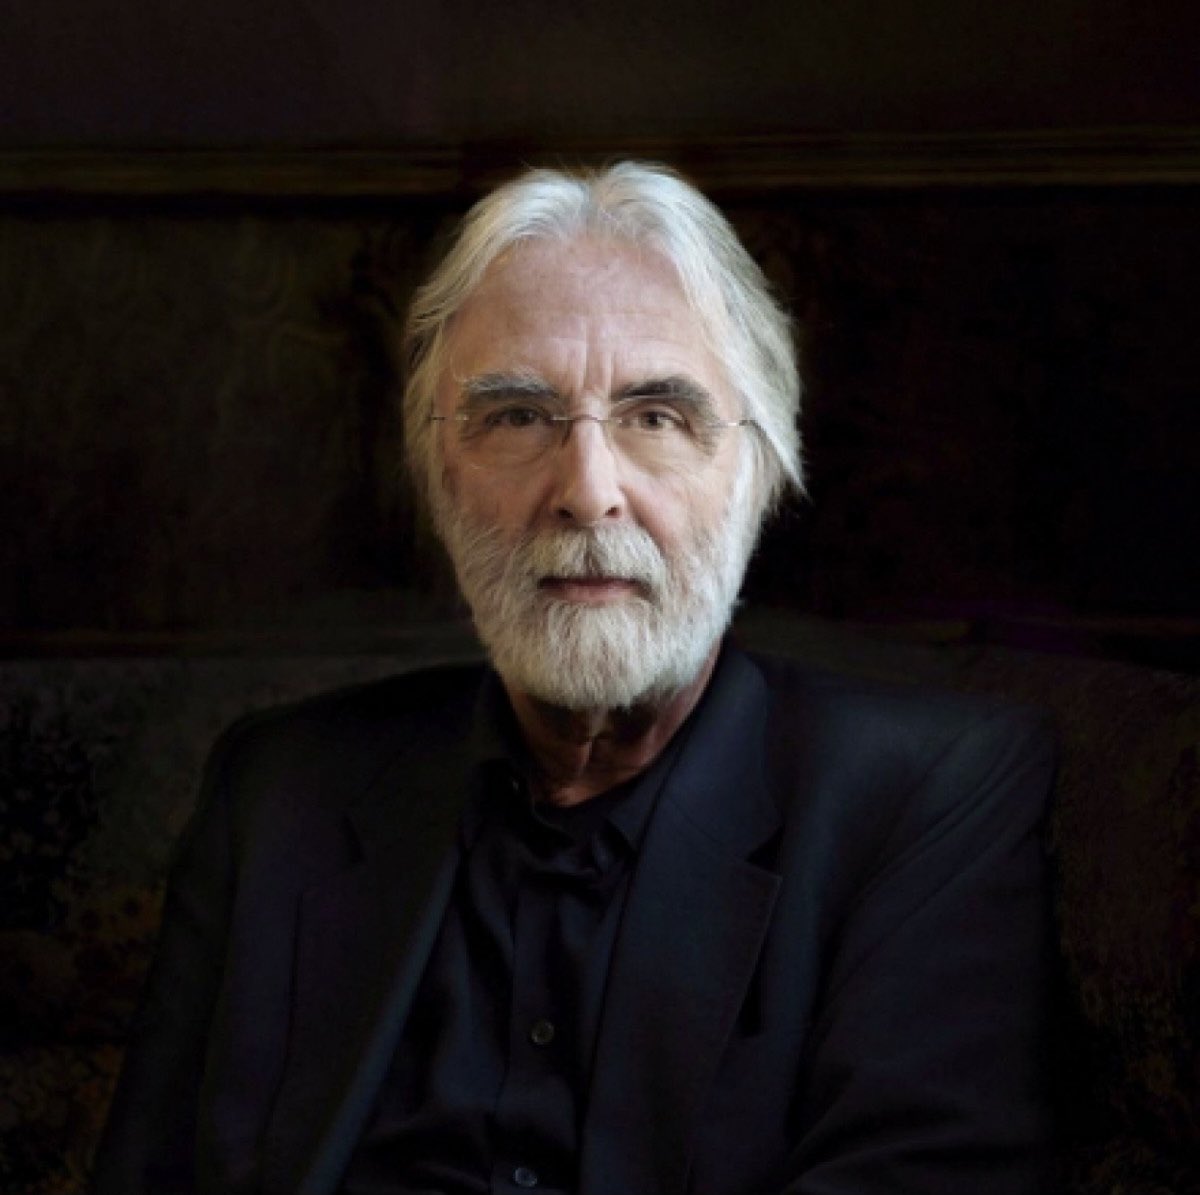 Happy Birthday to my favorite director, Michael Haneke. Thank you for all your incredible work. 